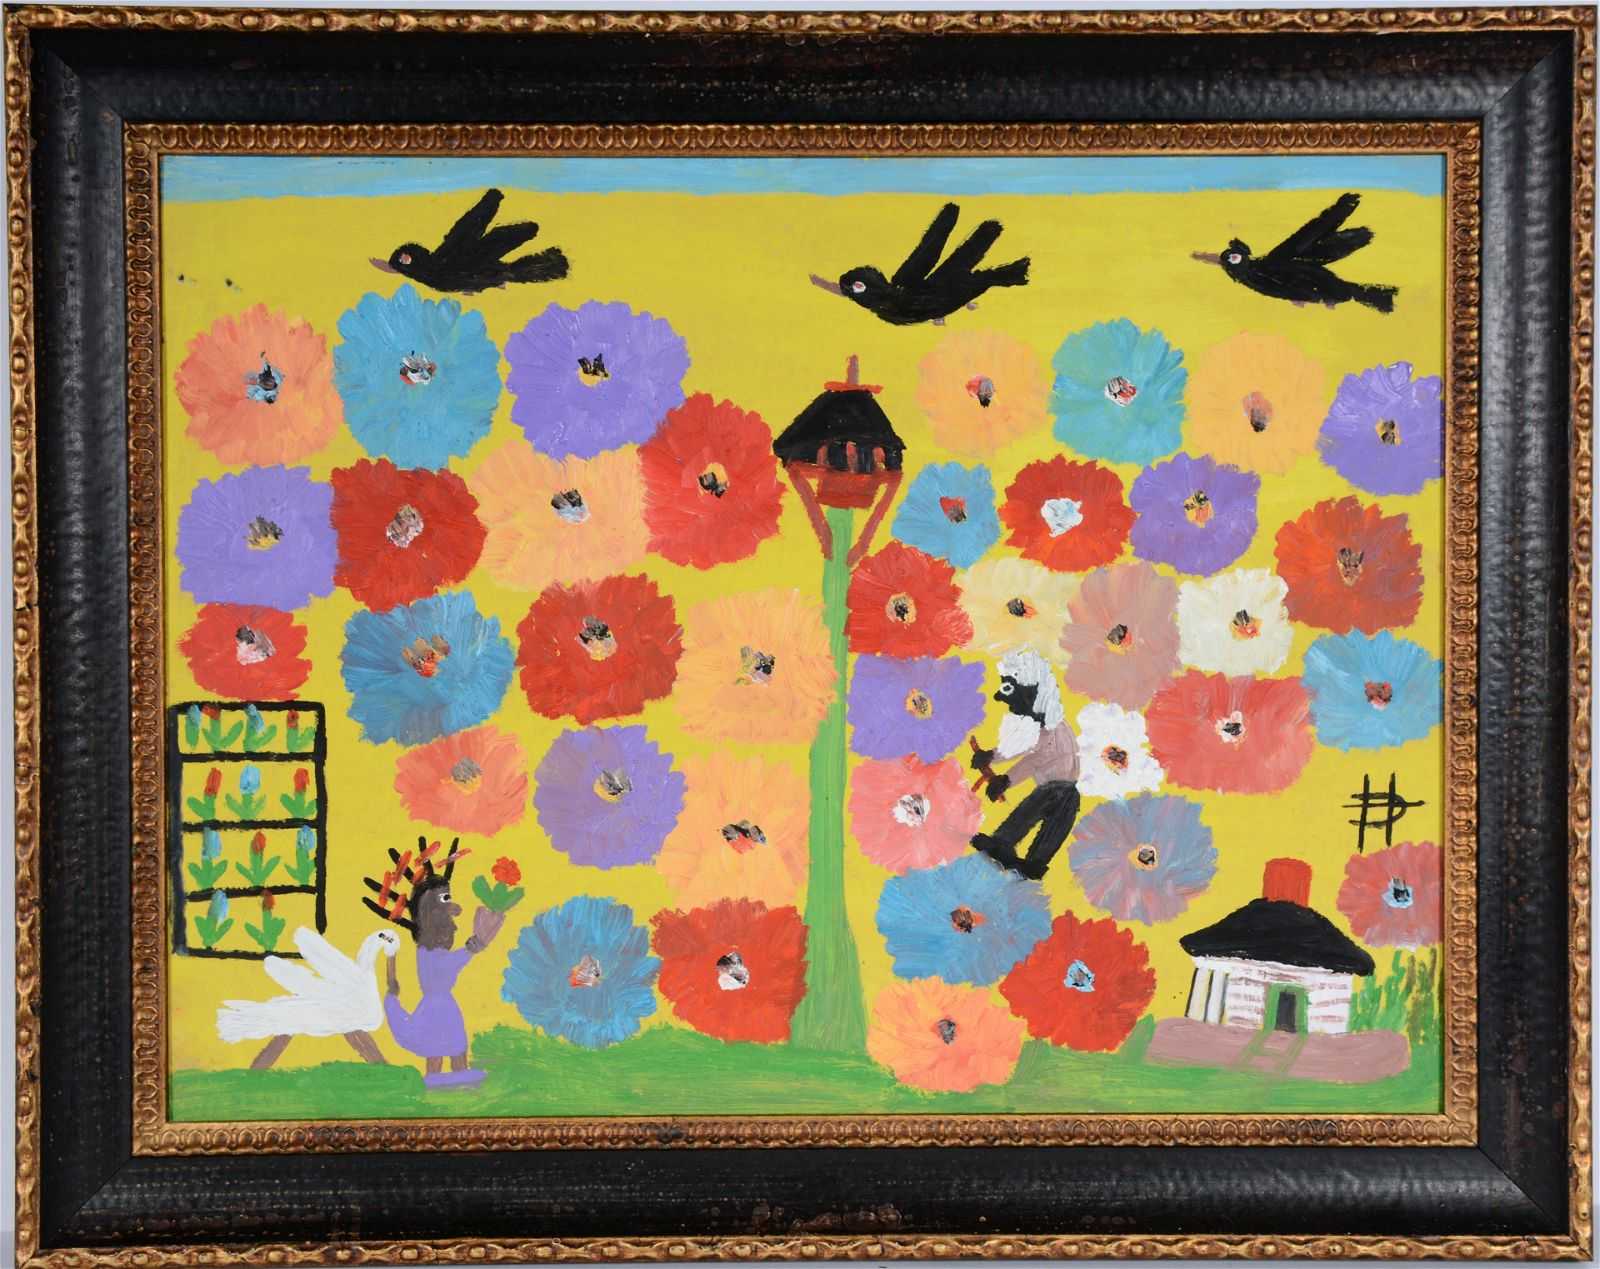 Clementine Hunter’s circa-1970s painting ‘Uncle Tom & Eliza in the Flower Garden’ features a favorite motif of the artist: zinnias. It sold for $16,500 plus the buyer’s premium in April 2021. Image courtesy of Slotin Folk Art Auction and LiveAuctioneers.